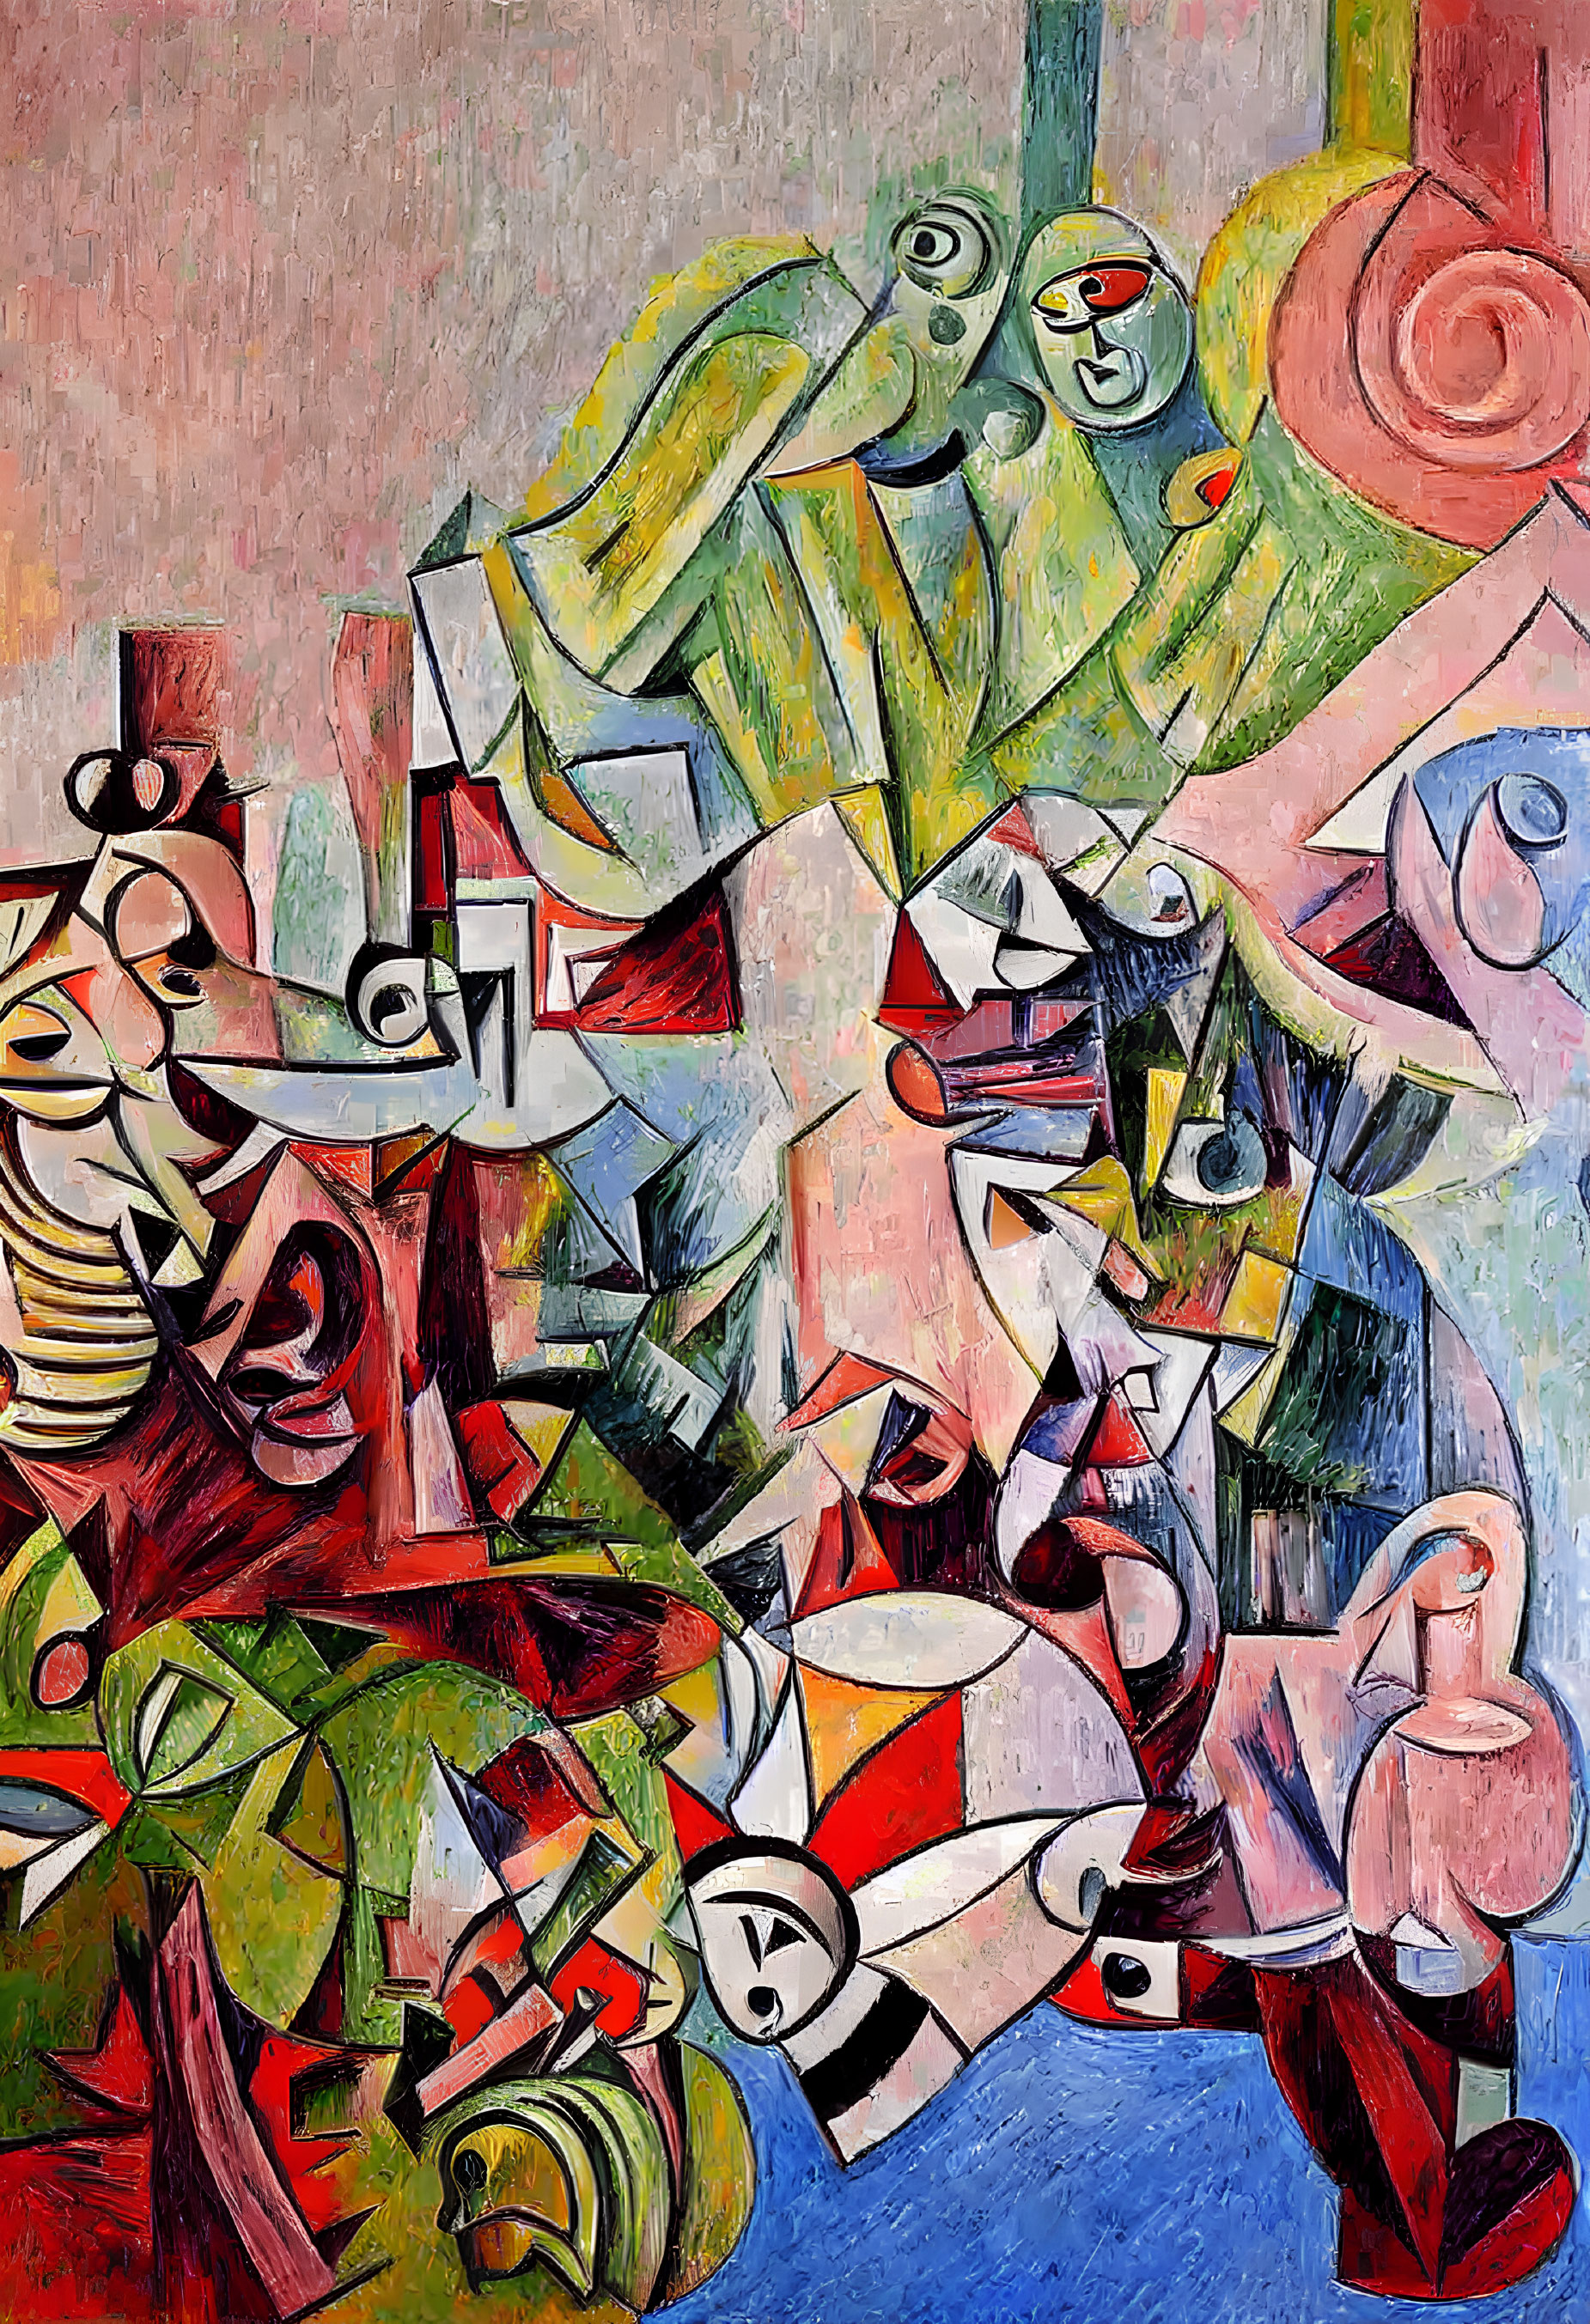 Colorful Cubist Painting with Interlocking Shapes and Musical Instrument Motifs